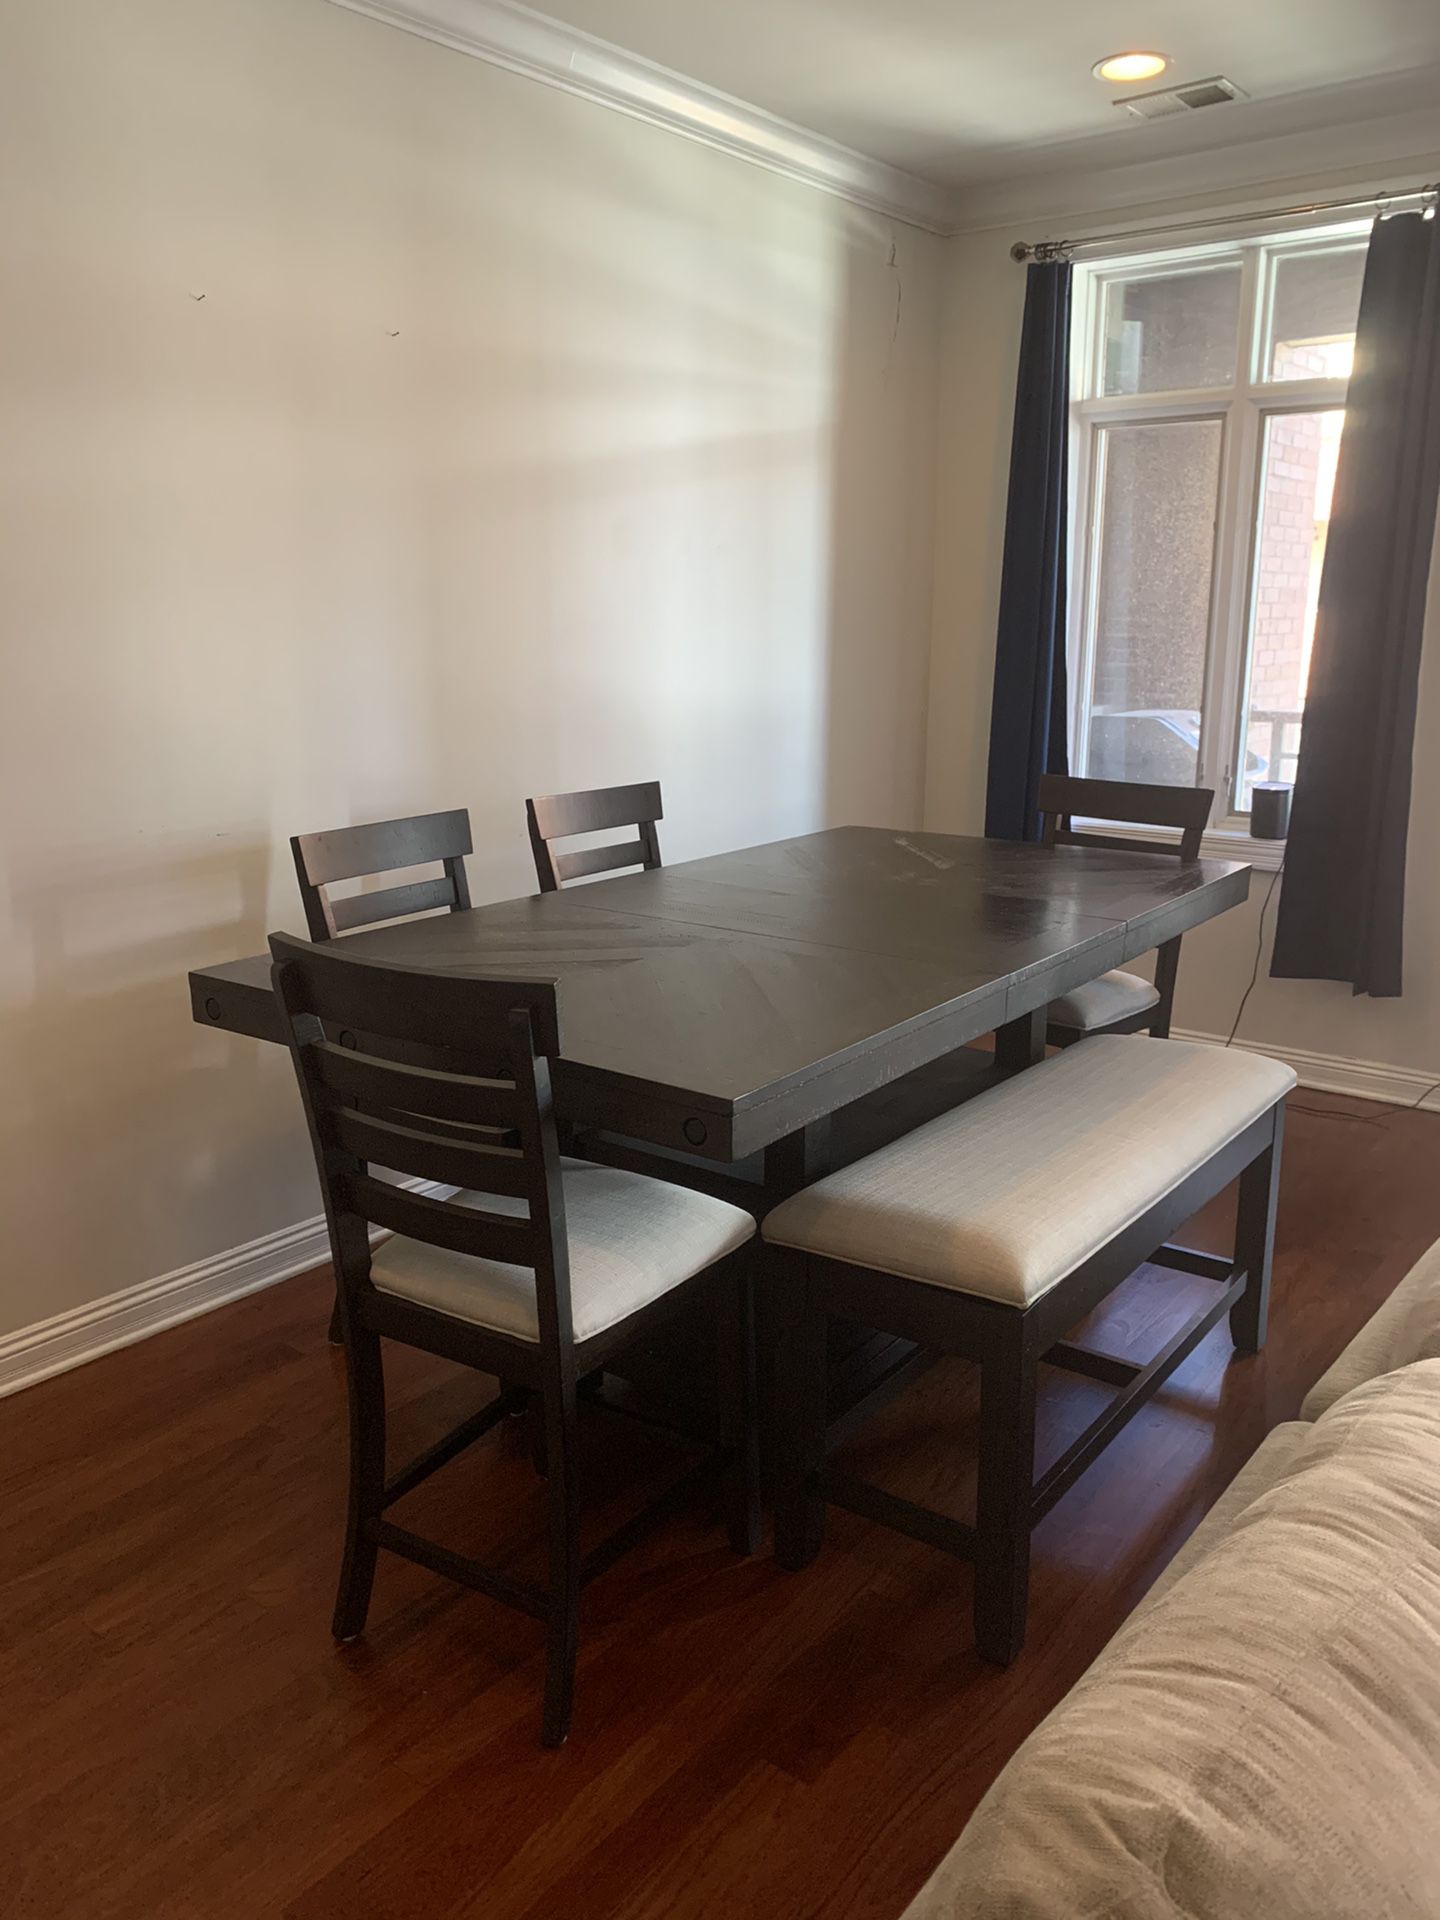 Dining Room Table Set - Bench & Chairs Included